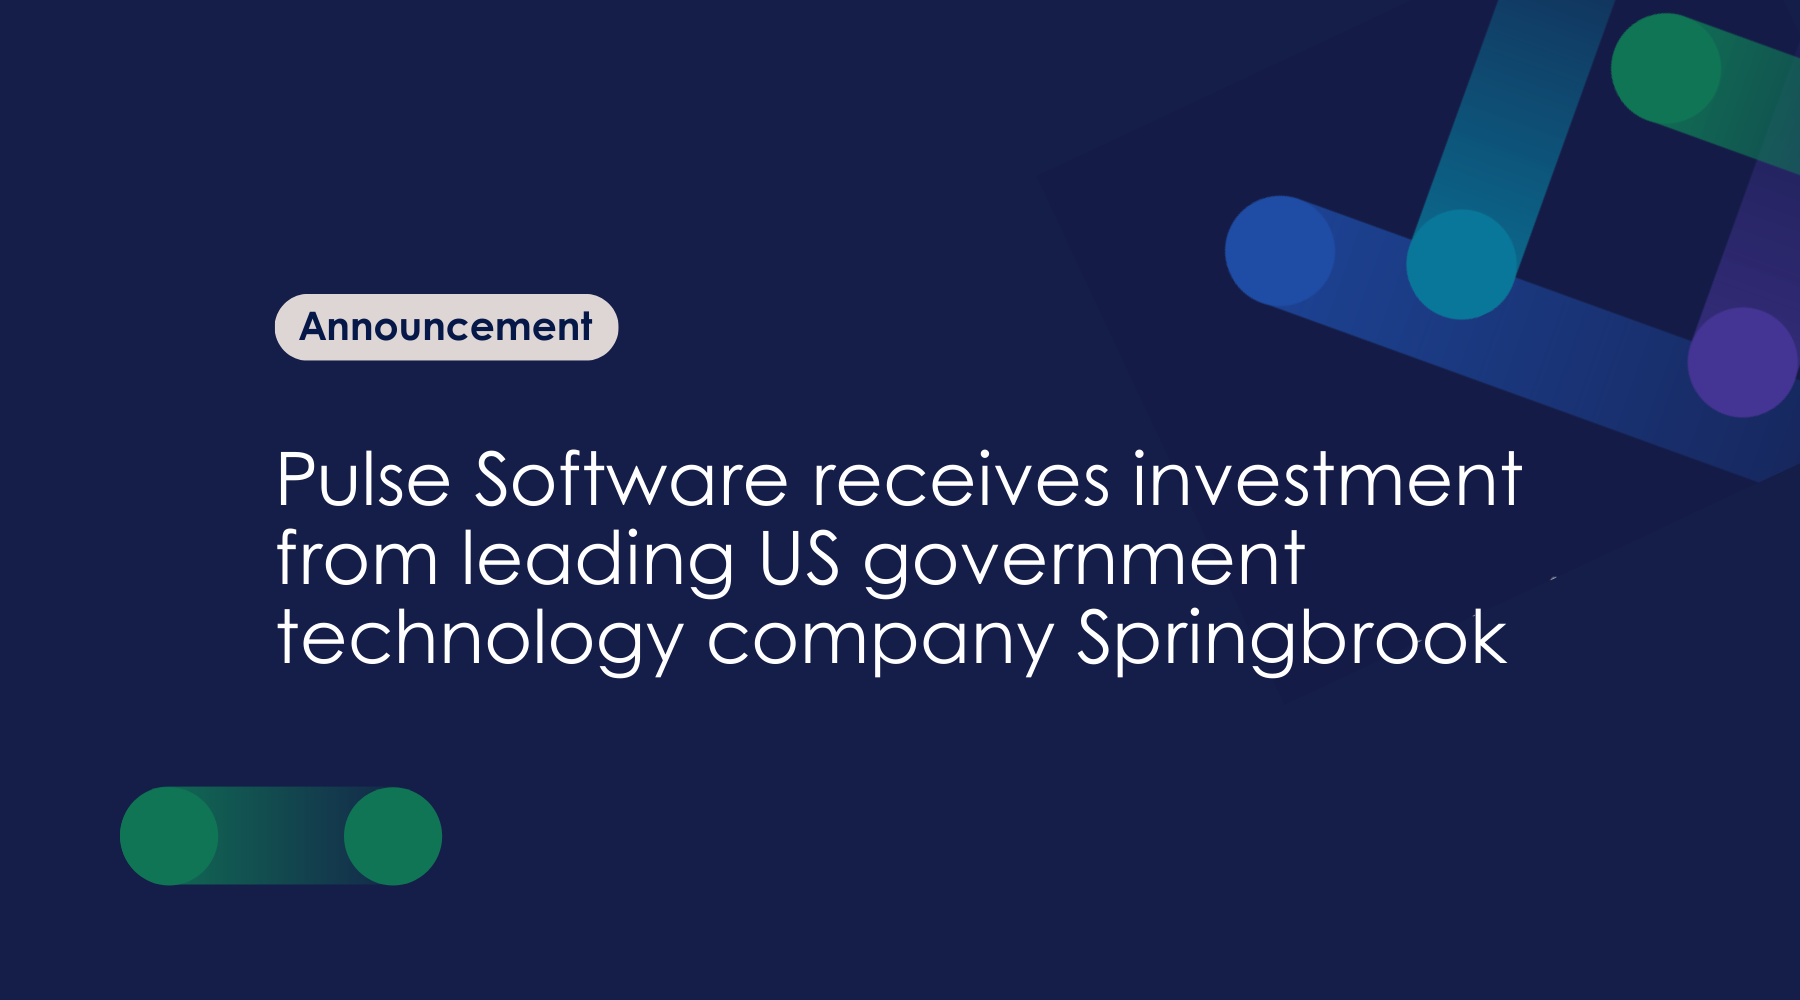 Pulse Software Receives Major Investment from Springbrook, Igniting a ...